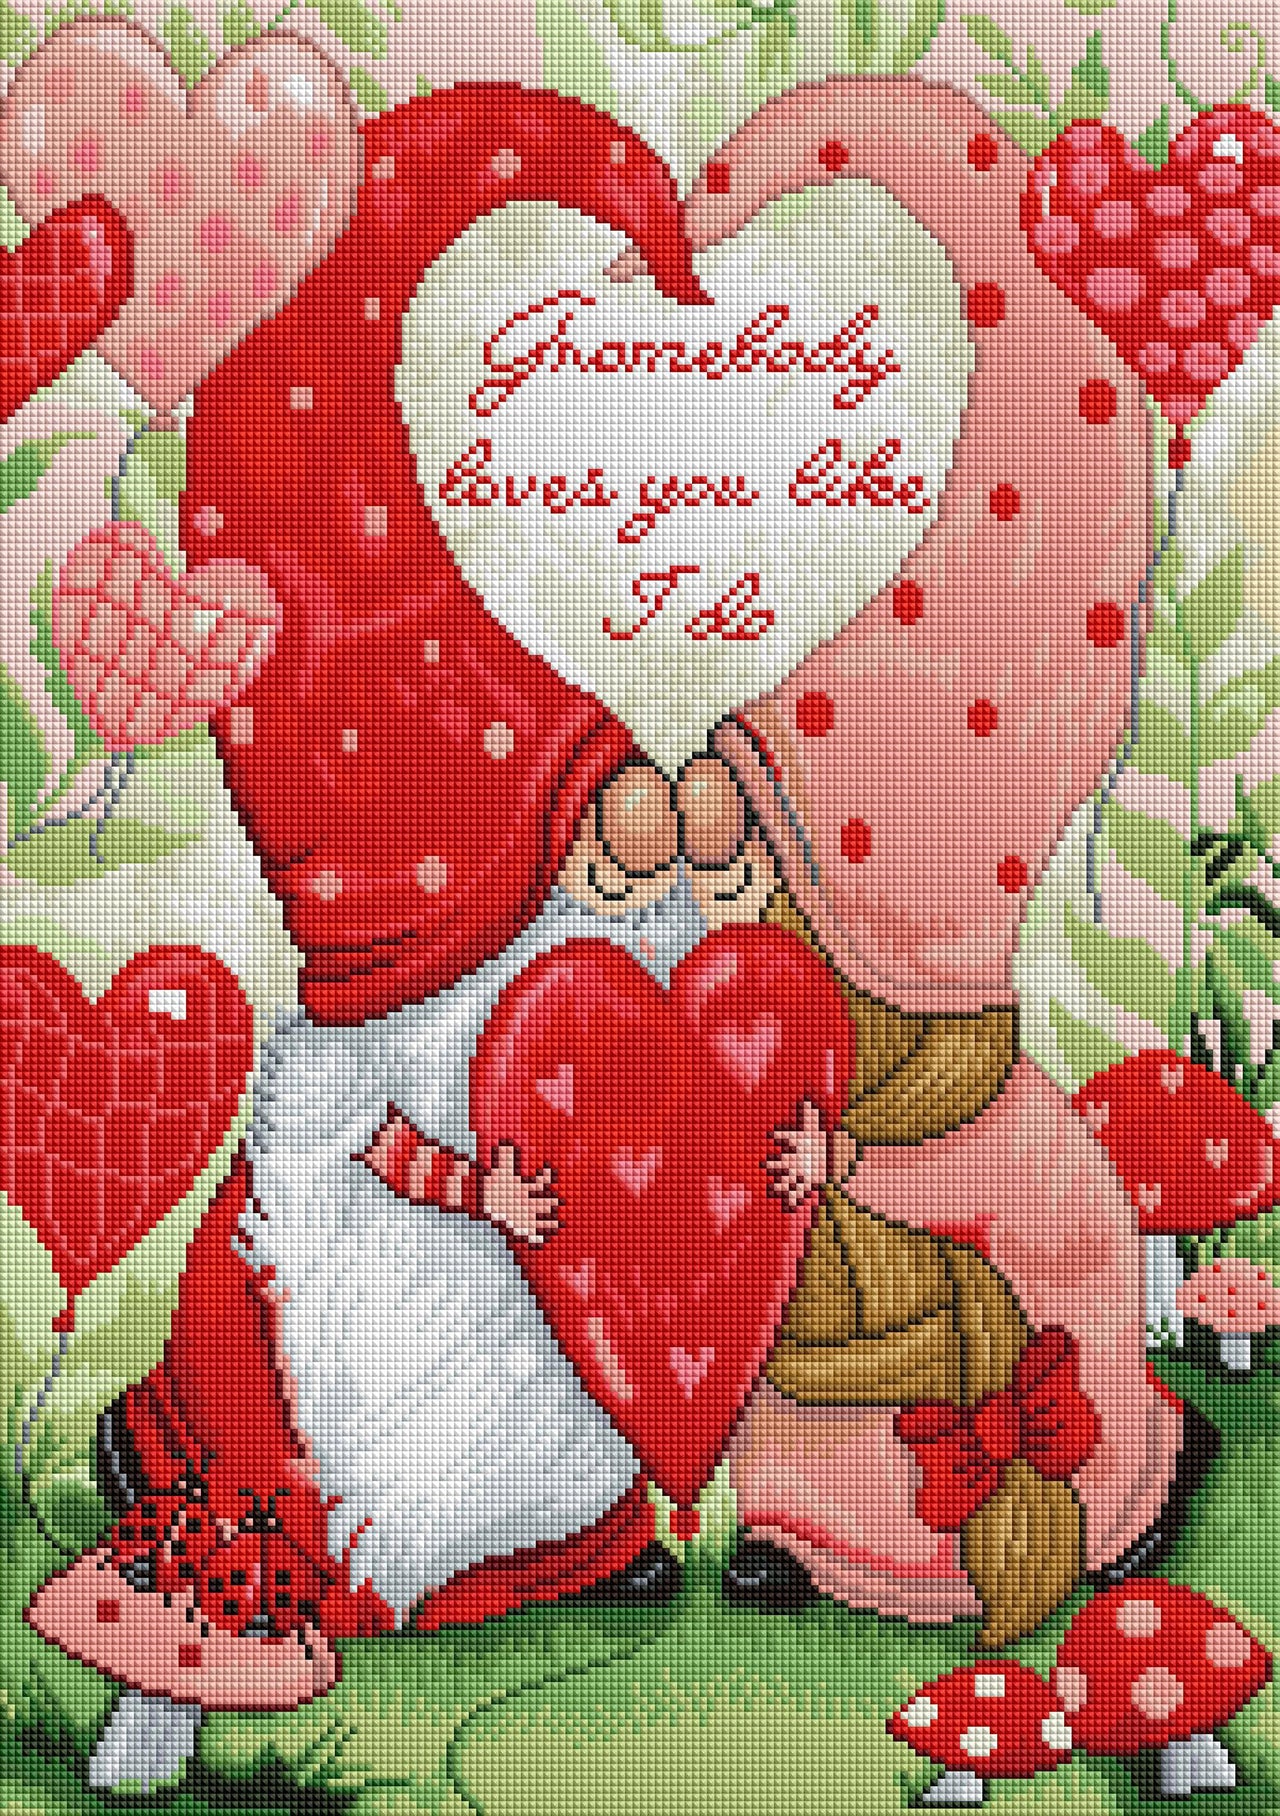 Diamond Painting Valentine Gnomes 17" x 24" (43cm x 61cm) / Square with 40 Colors including 4 ABs / 41,968